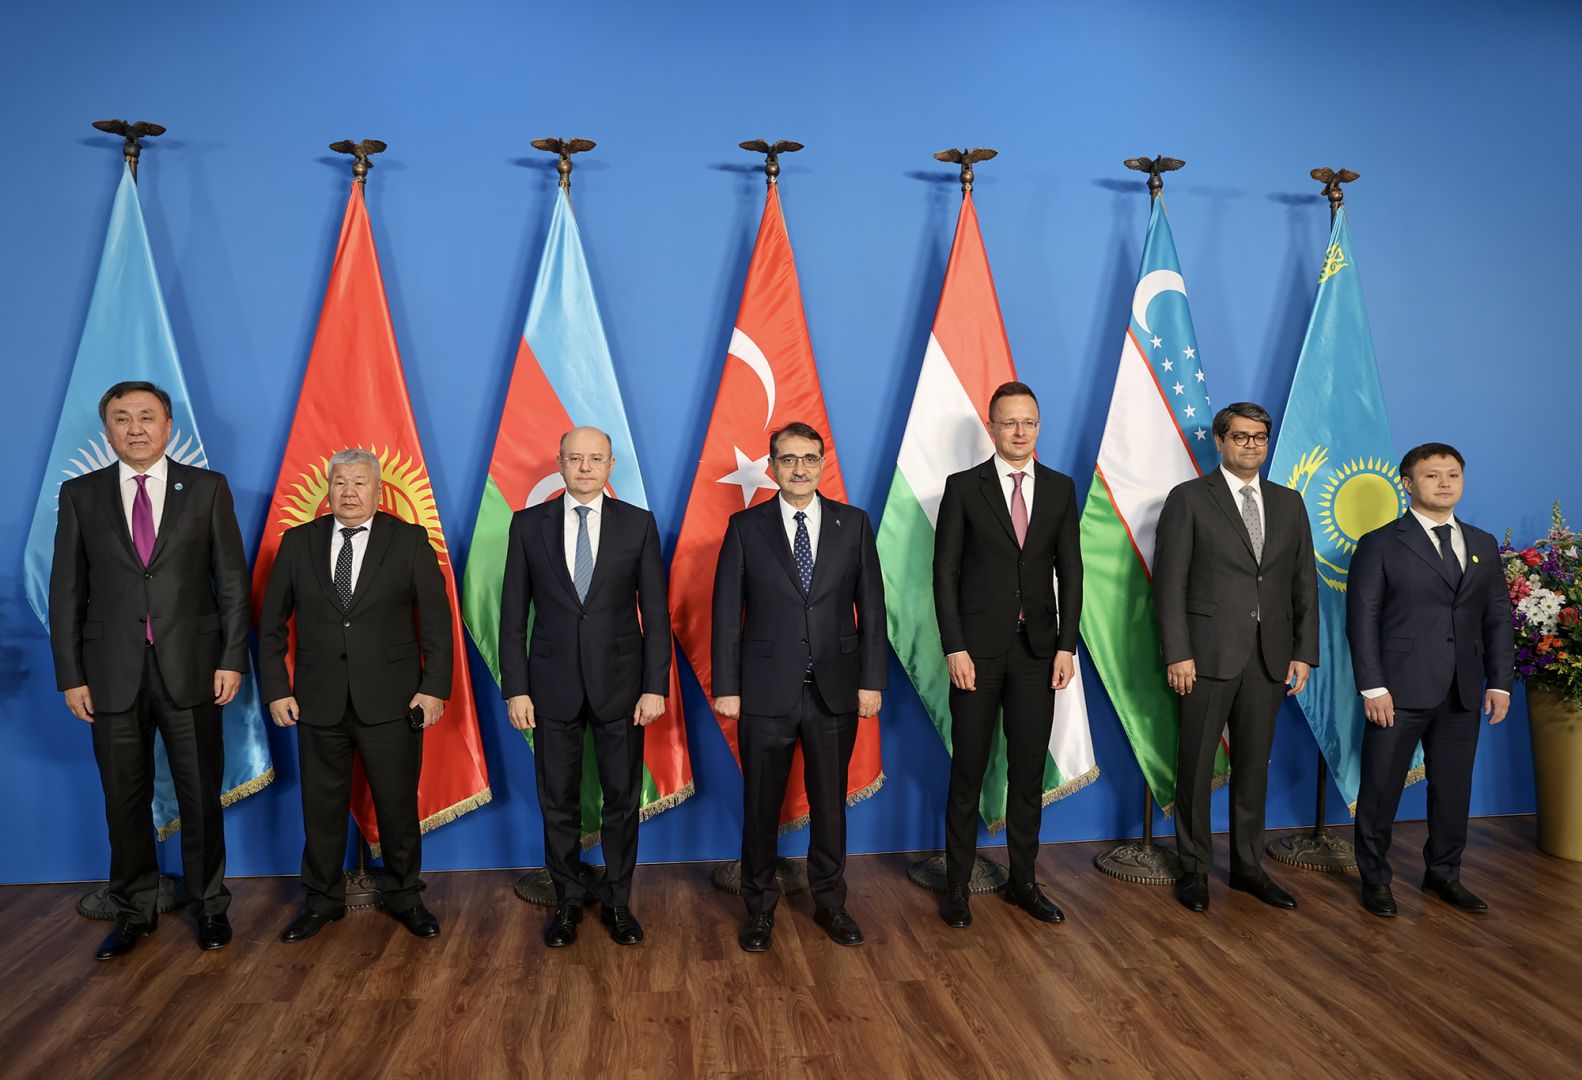 Energy minister speaks on Azerbaijan's contribution to  energy co-op with Turkic-speaking states [PHOTOS]